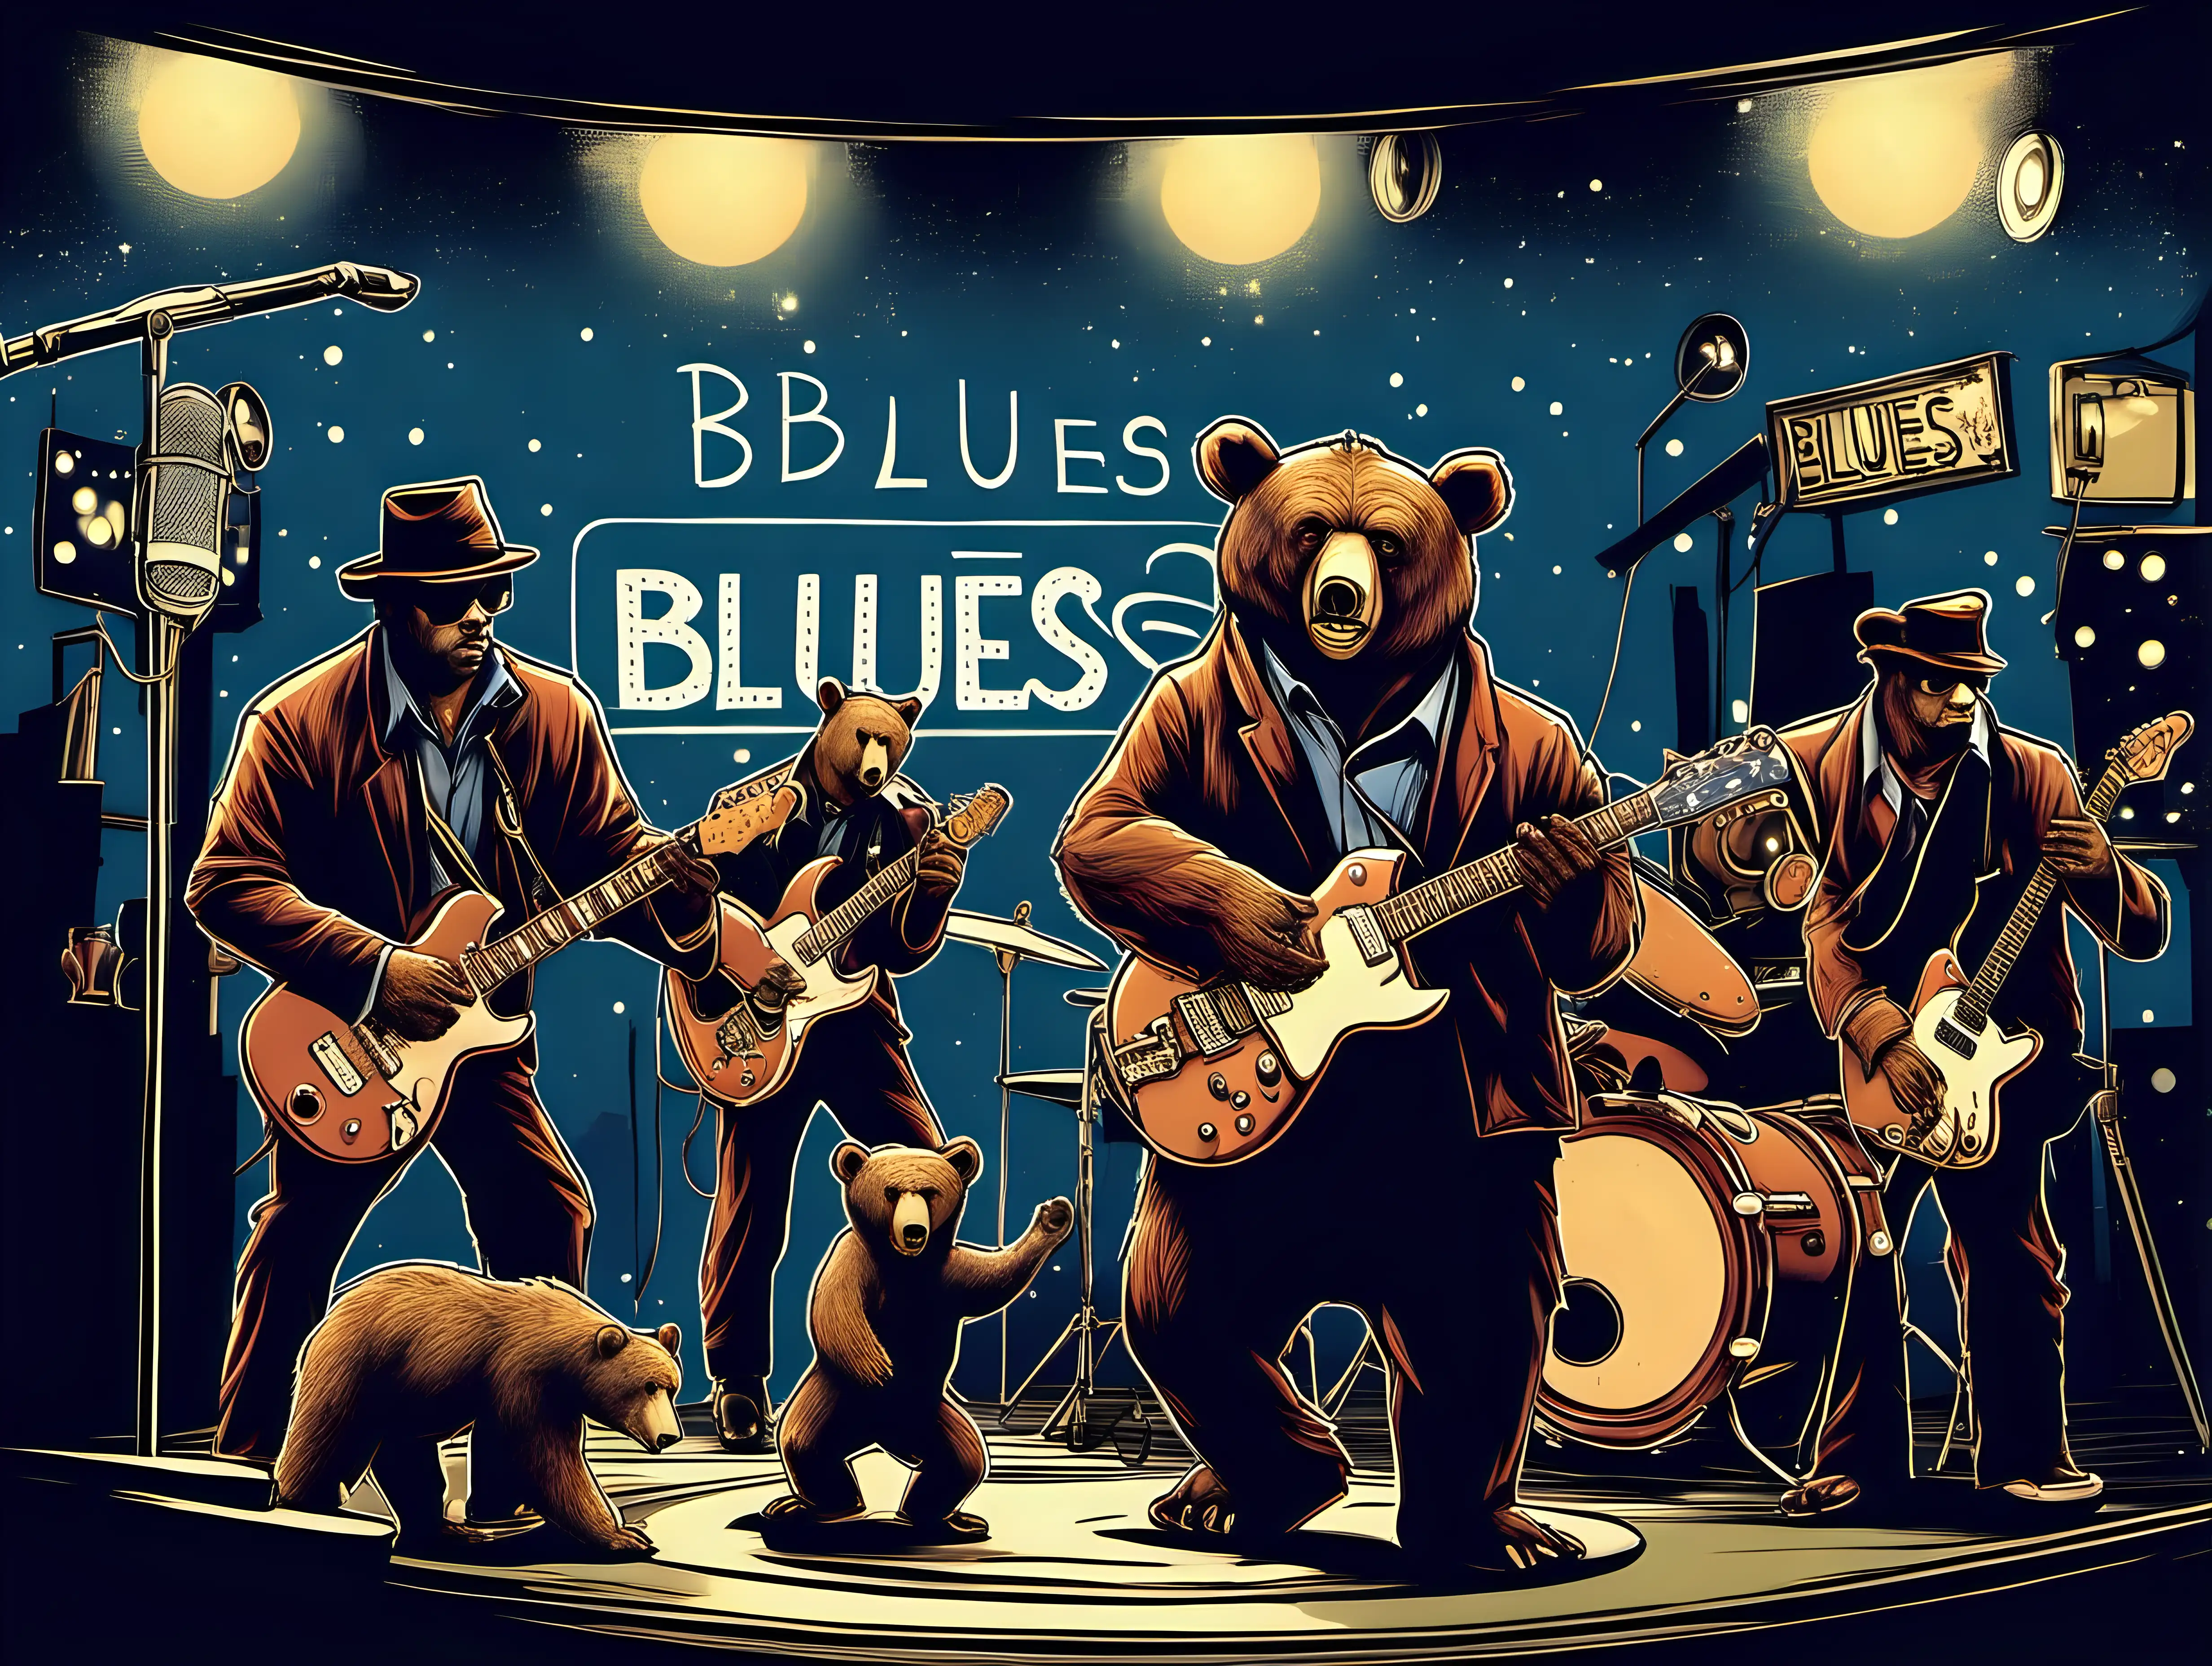 blues band in a night club with a bear on guitar 